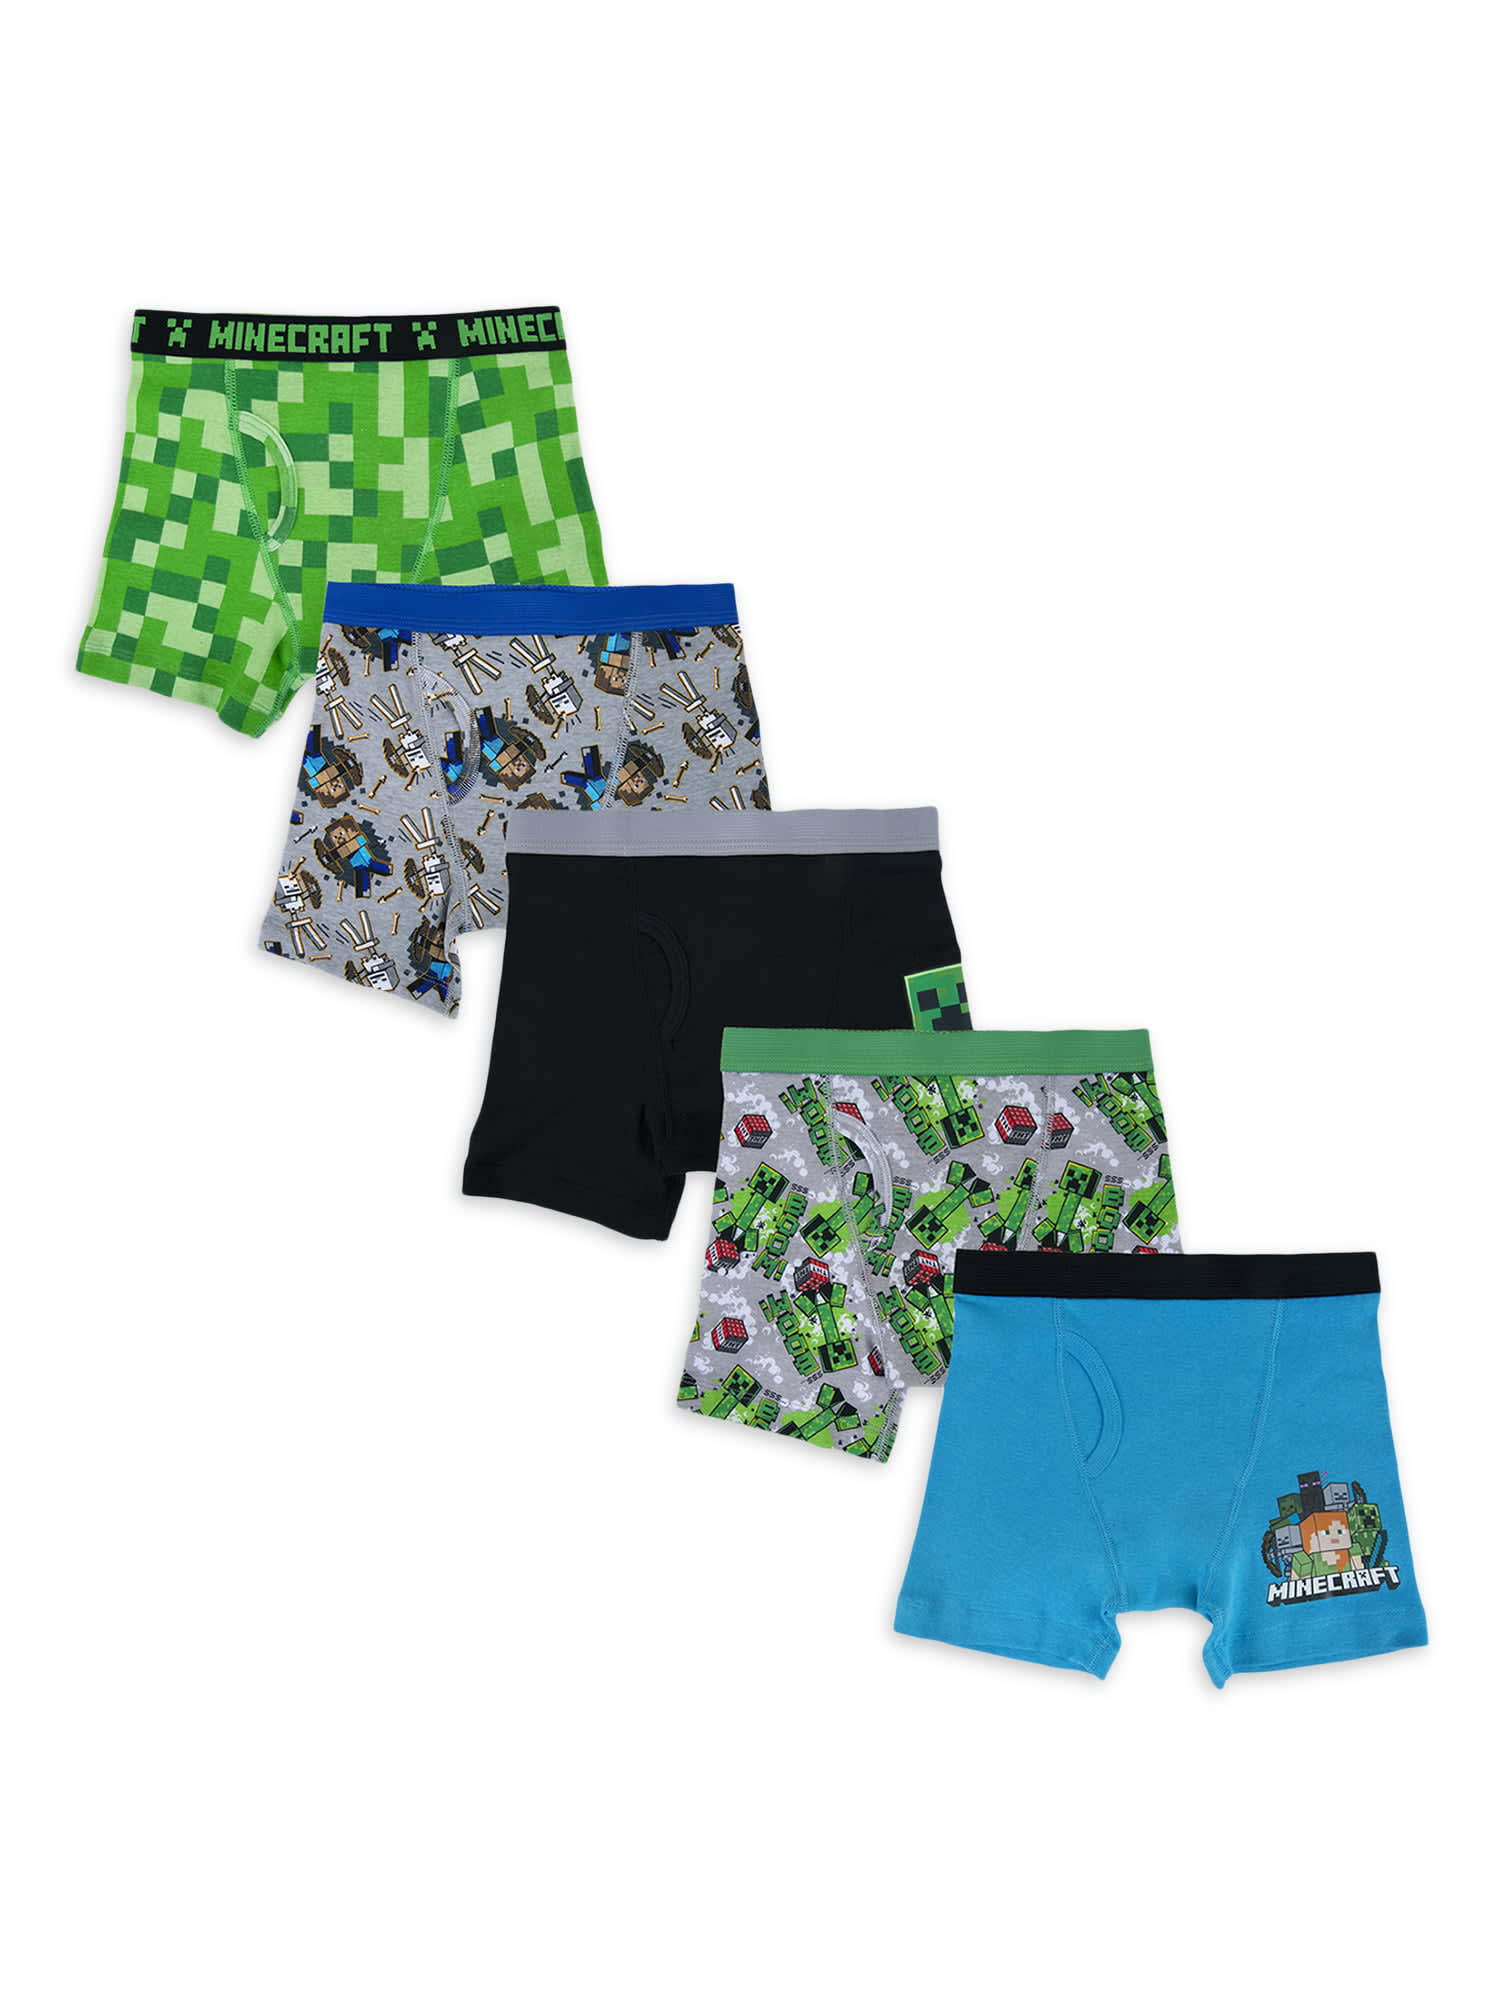 Minecraft Boys Boxer Briefs, 5 Pack, Sizes 6-8 - DroneUp Delivery